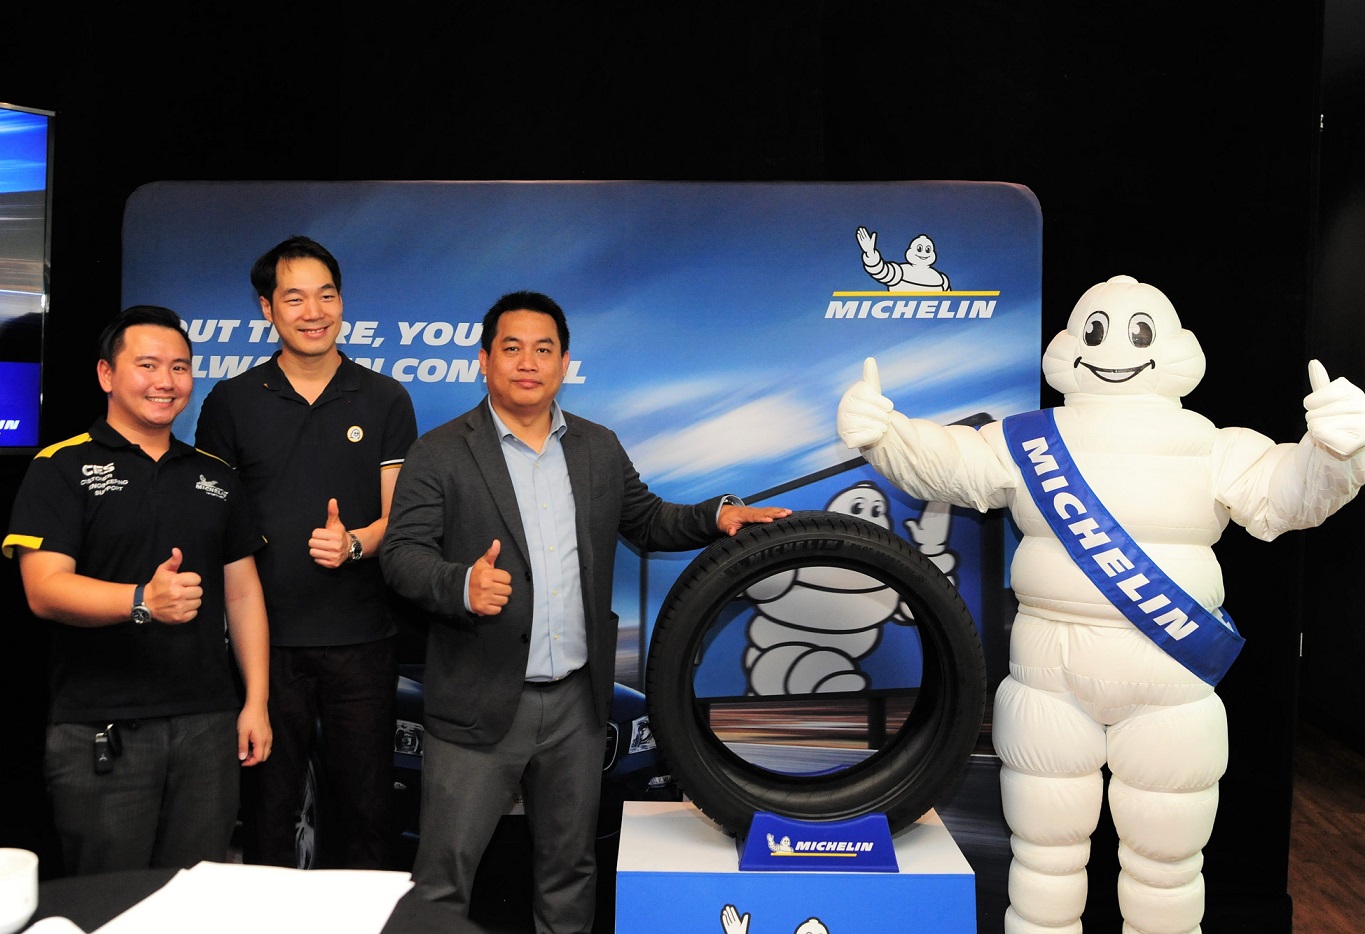 Motoring-Malaysia: MICHELIN Malaysia Launches the MICHELIN Pilot Sport 4  SUV - New Flagship Tyre for SUVs